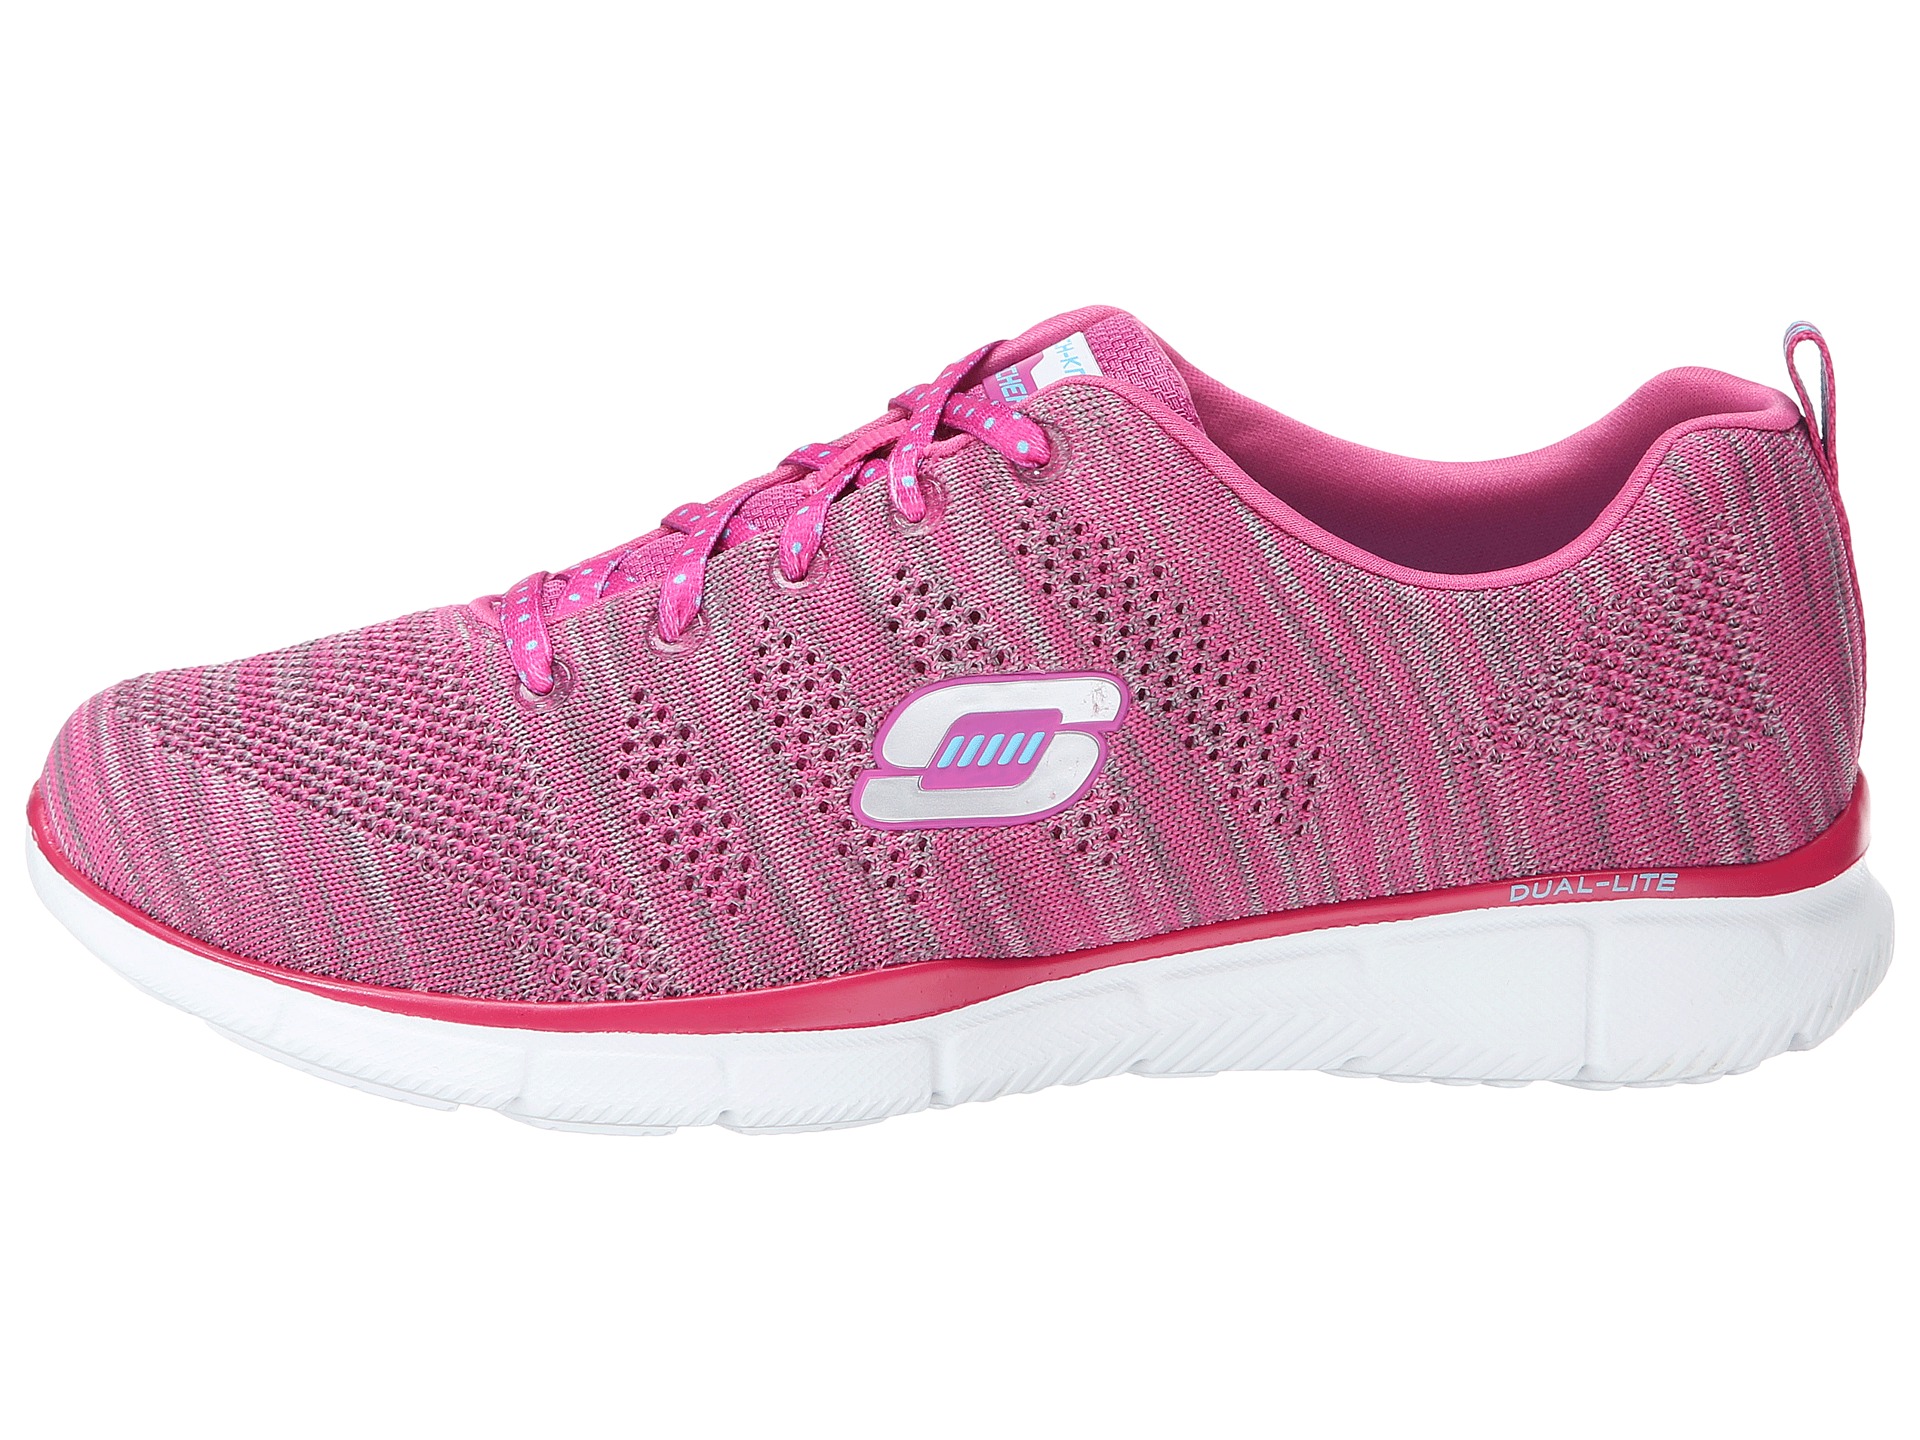 SKECHERS Equalizer - Zappos.com Free Shipping BOTH Ways